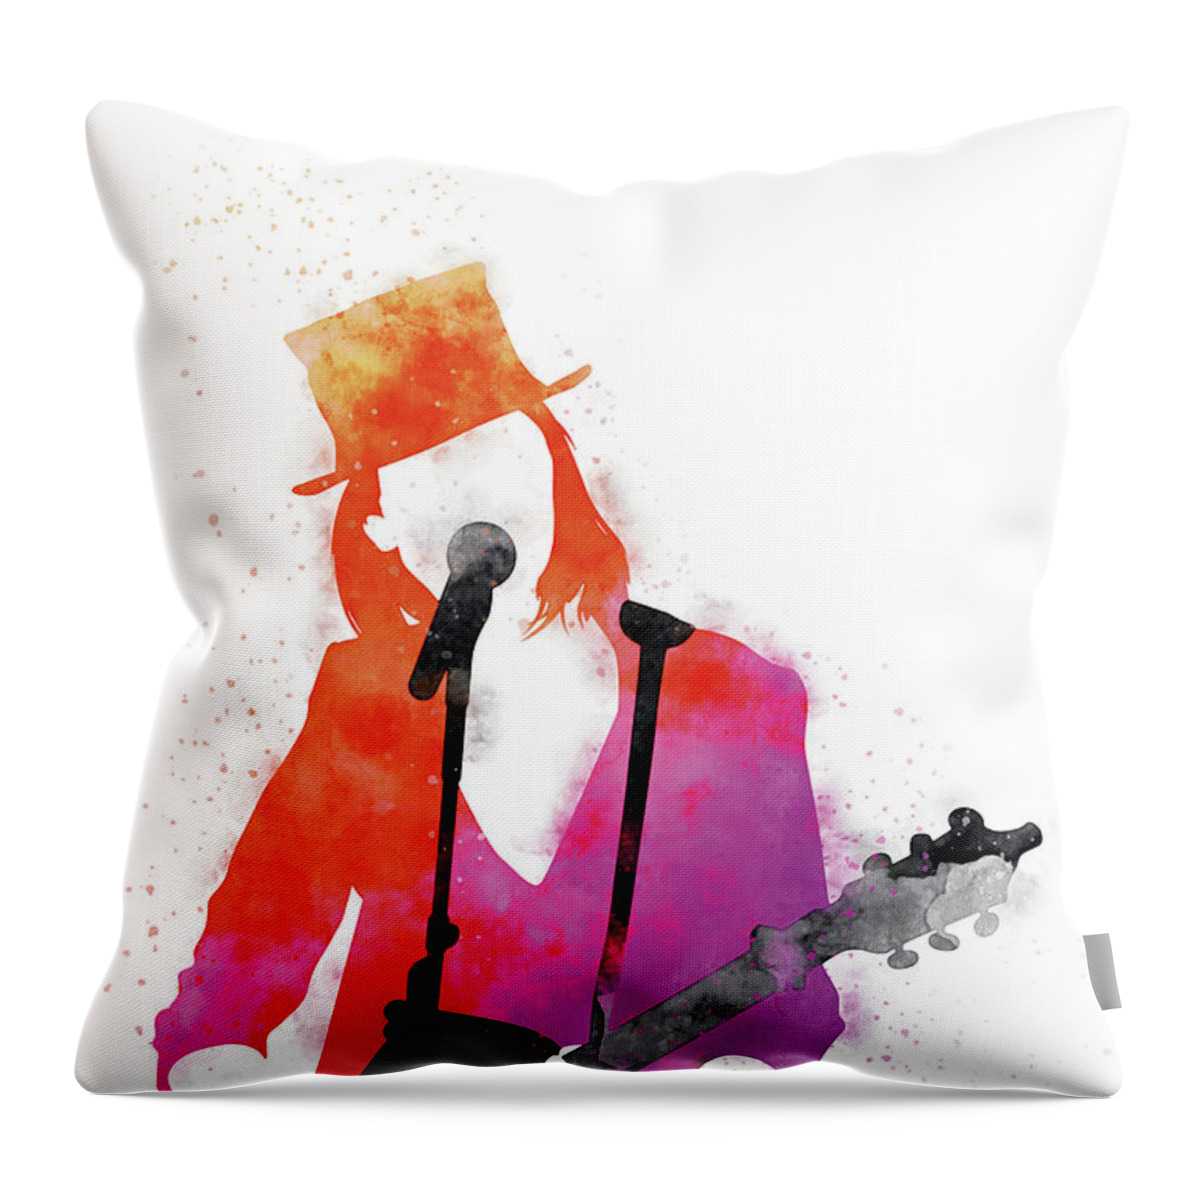 Suzanne Throw Pillow featuring the digital art No298 MY Suzanne Vega Watercolor Music poster by Chungkong Art